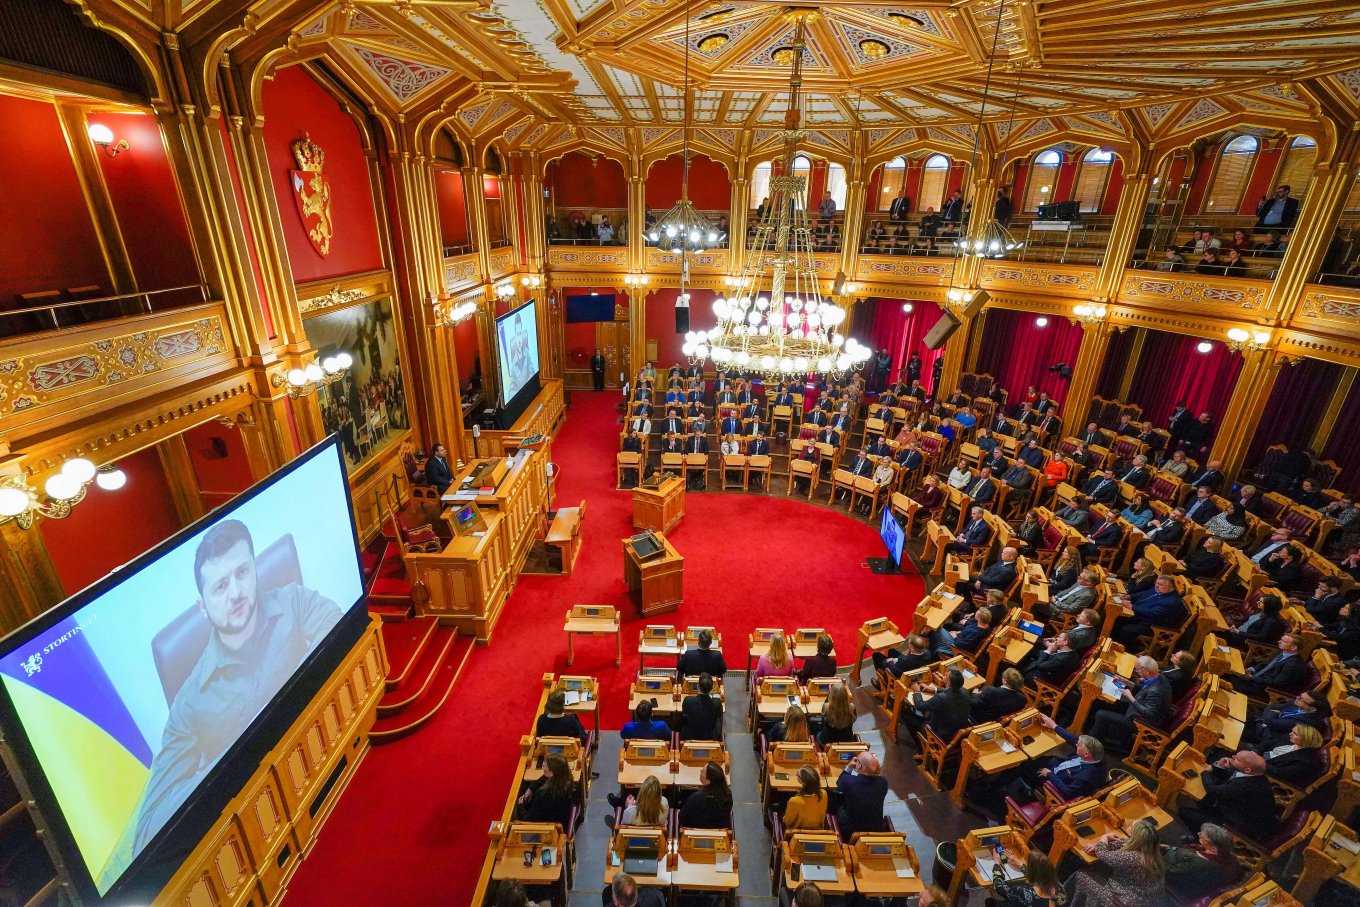 Ukrainian President Volodymyr Zelensky is seen on large screens as he addresses members of Norway's Parliament, The Storting, in Oslo, Norway, on March 30, Day 35th of Ukraine's Defense Against Russian Invasion, Defense Express